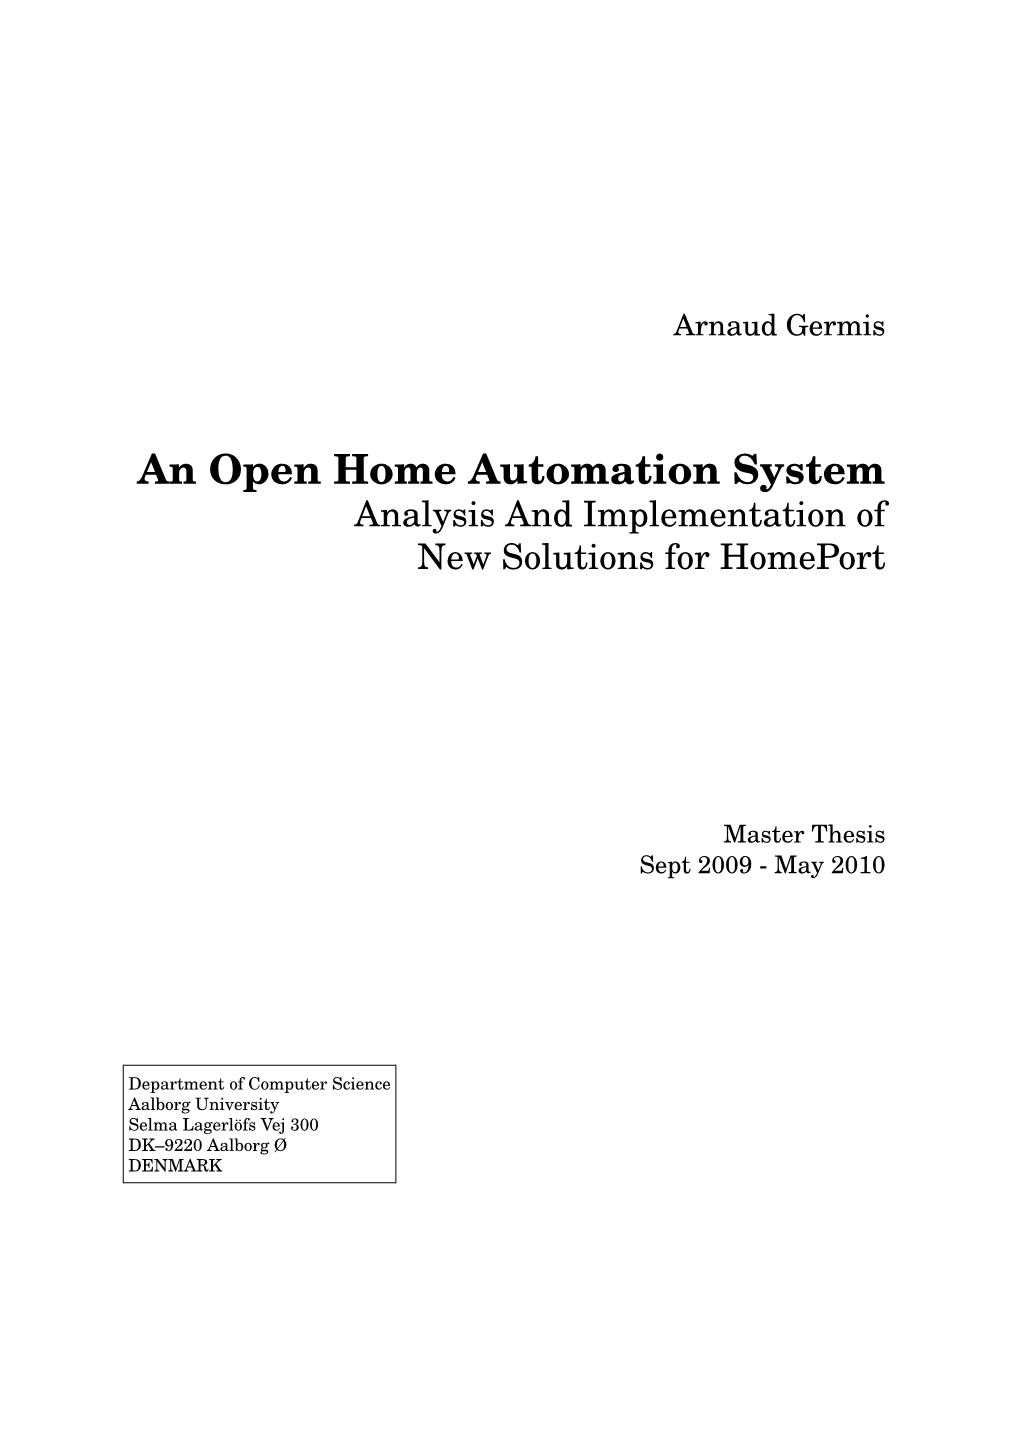 An Open Home Automation System Analysis and Implementation of New Solutions for Homeport